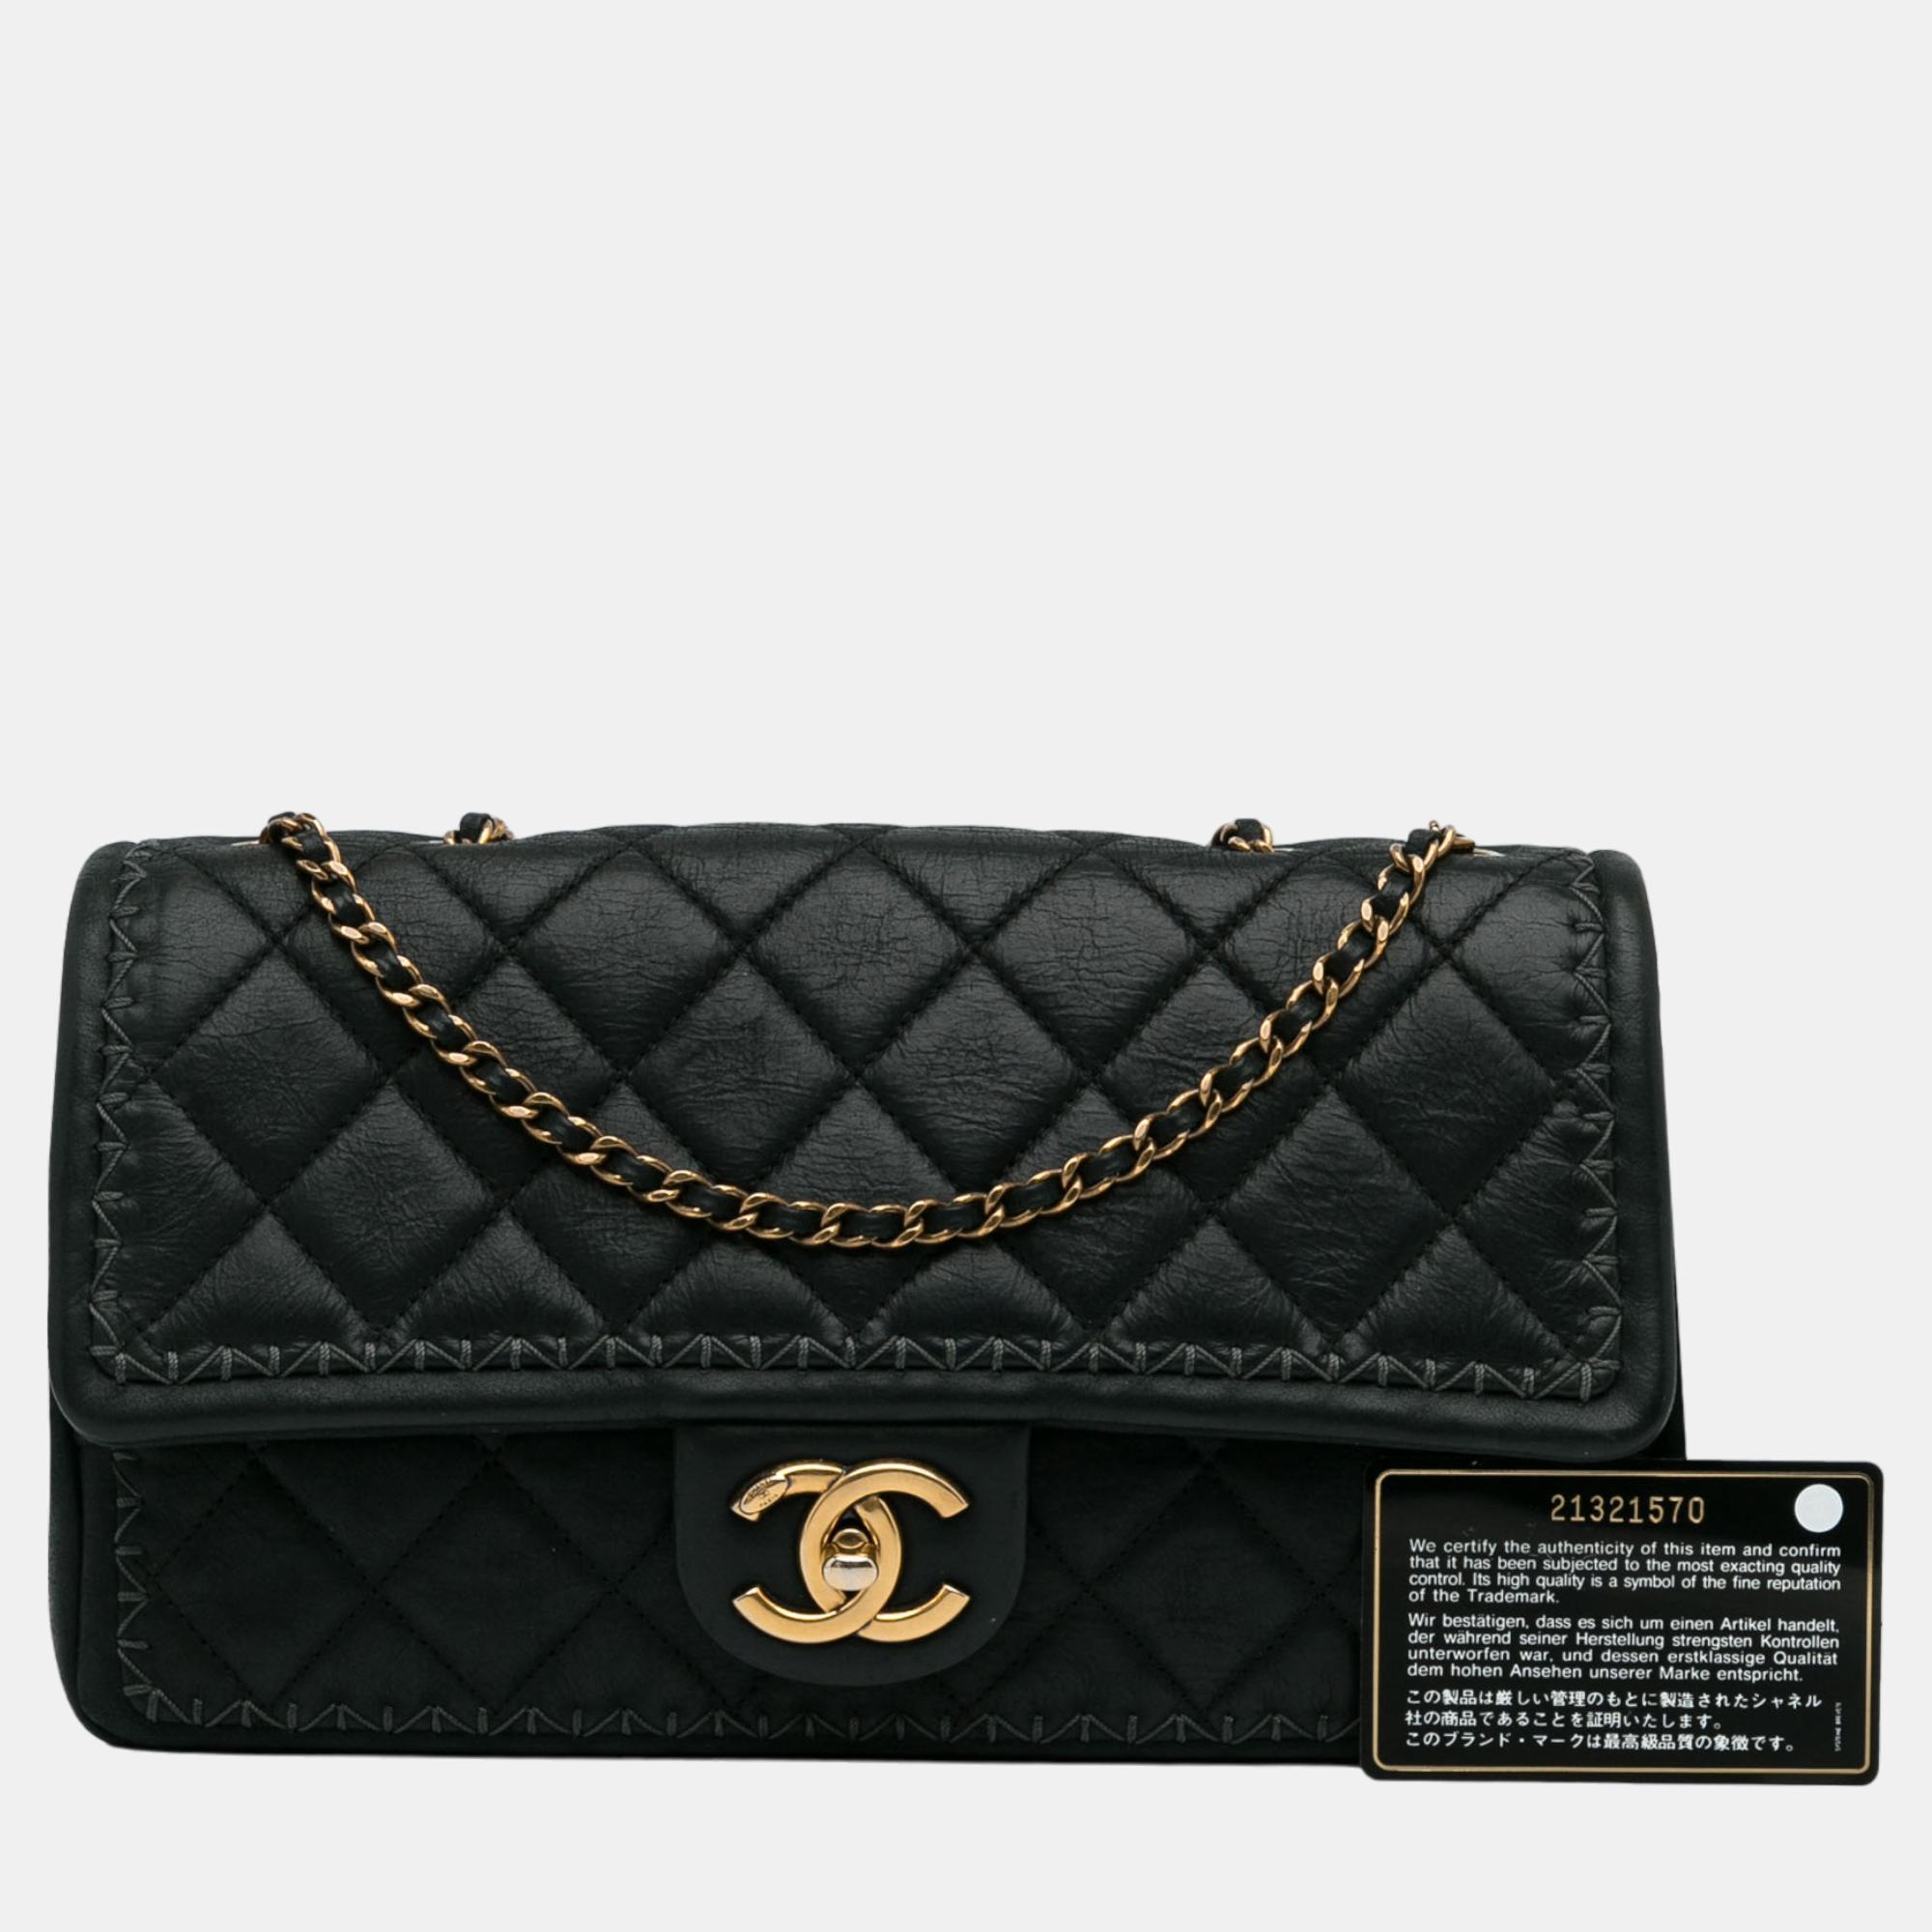 Chanel Black Quilted Lambskin Stitch Single Flap